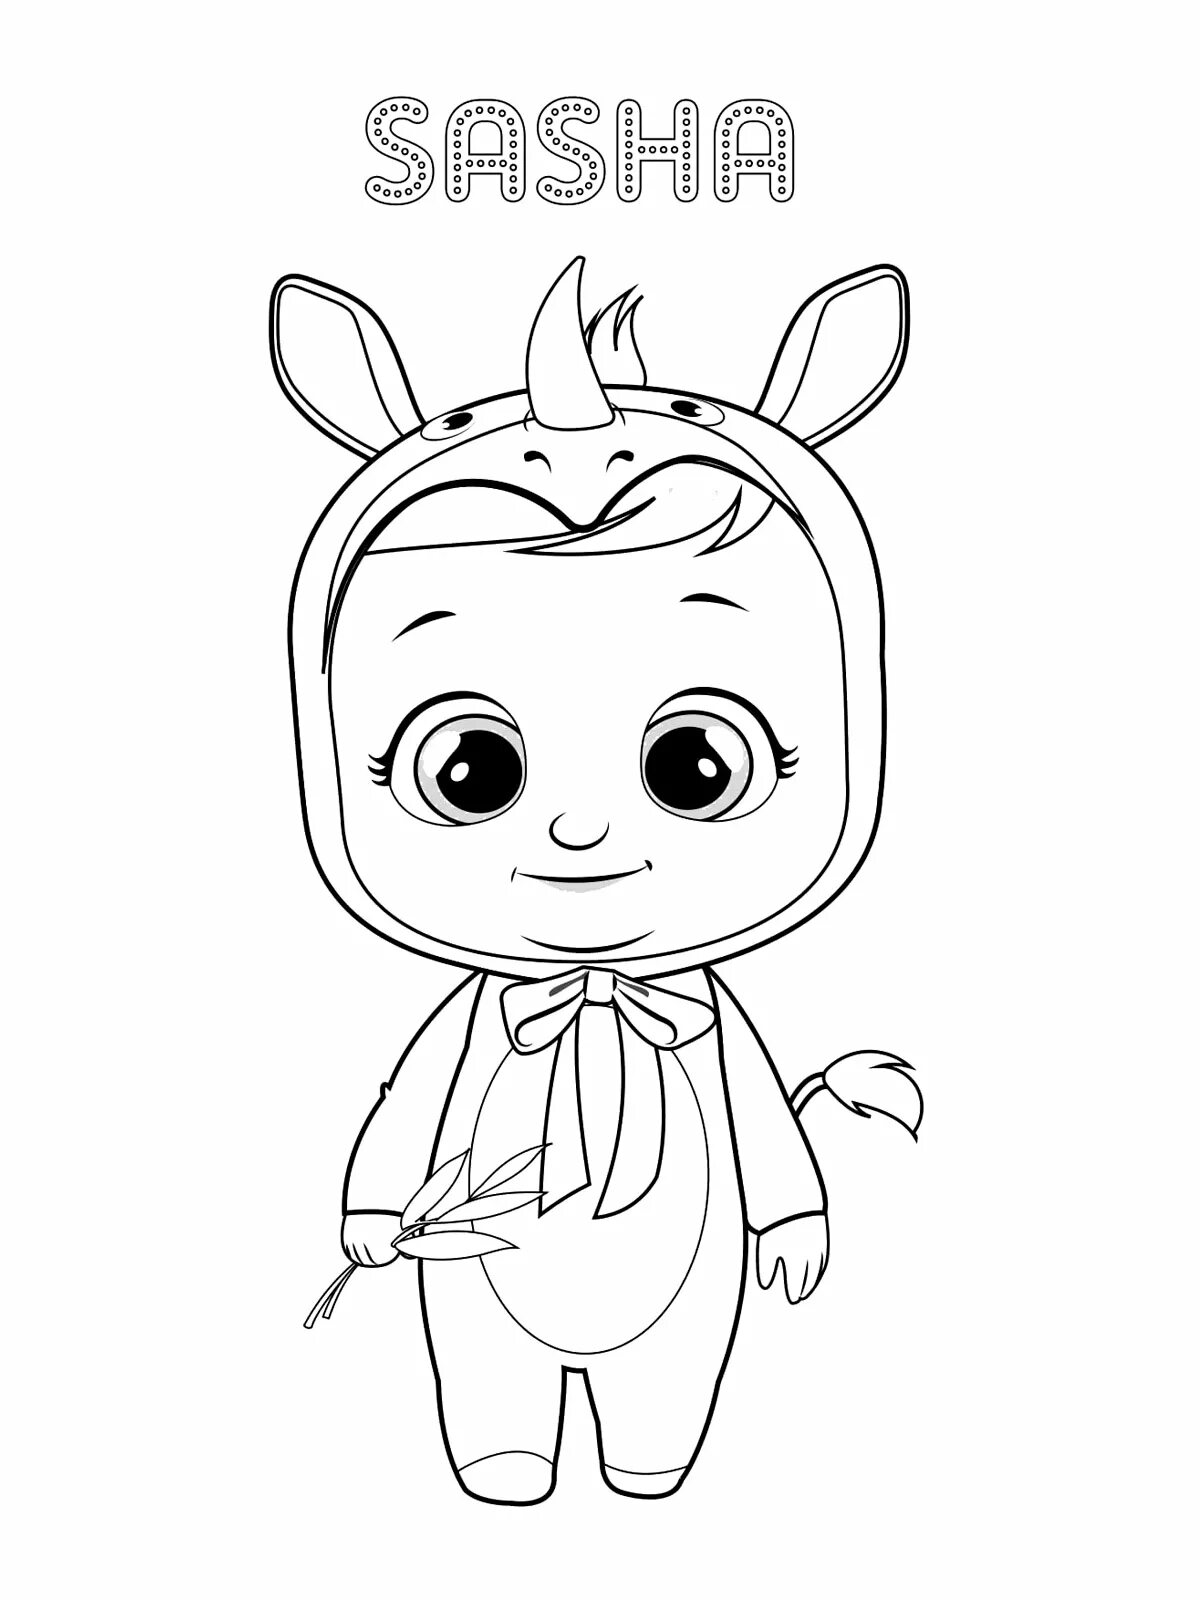 Luxury crybaby coloring book